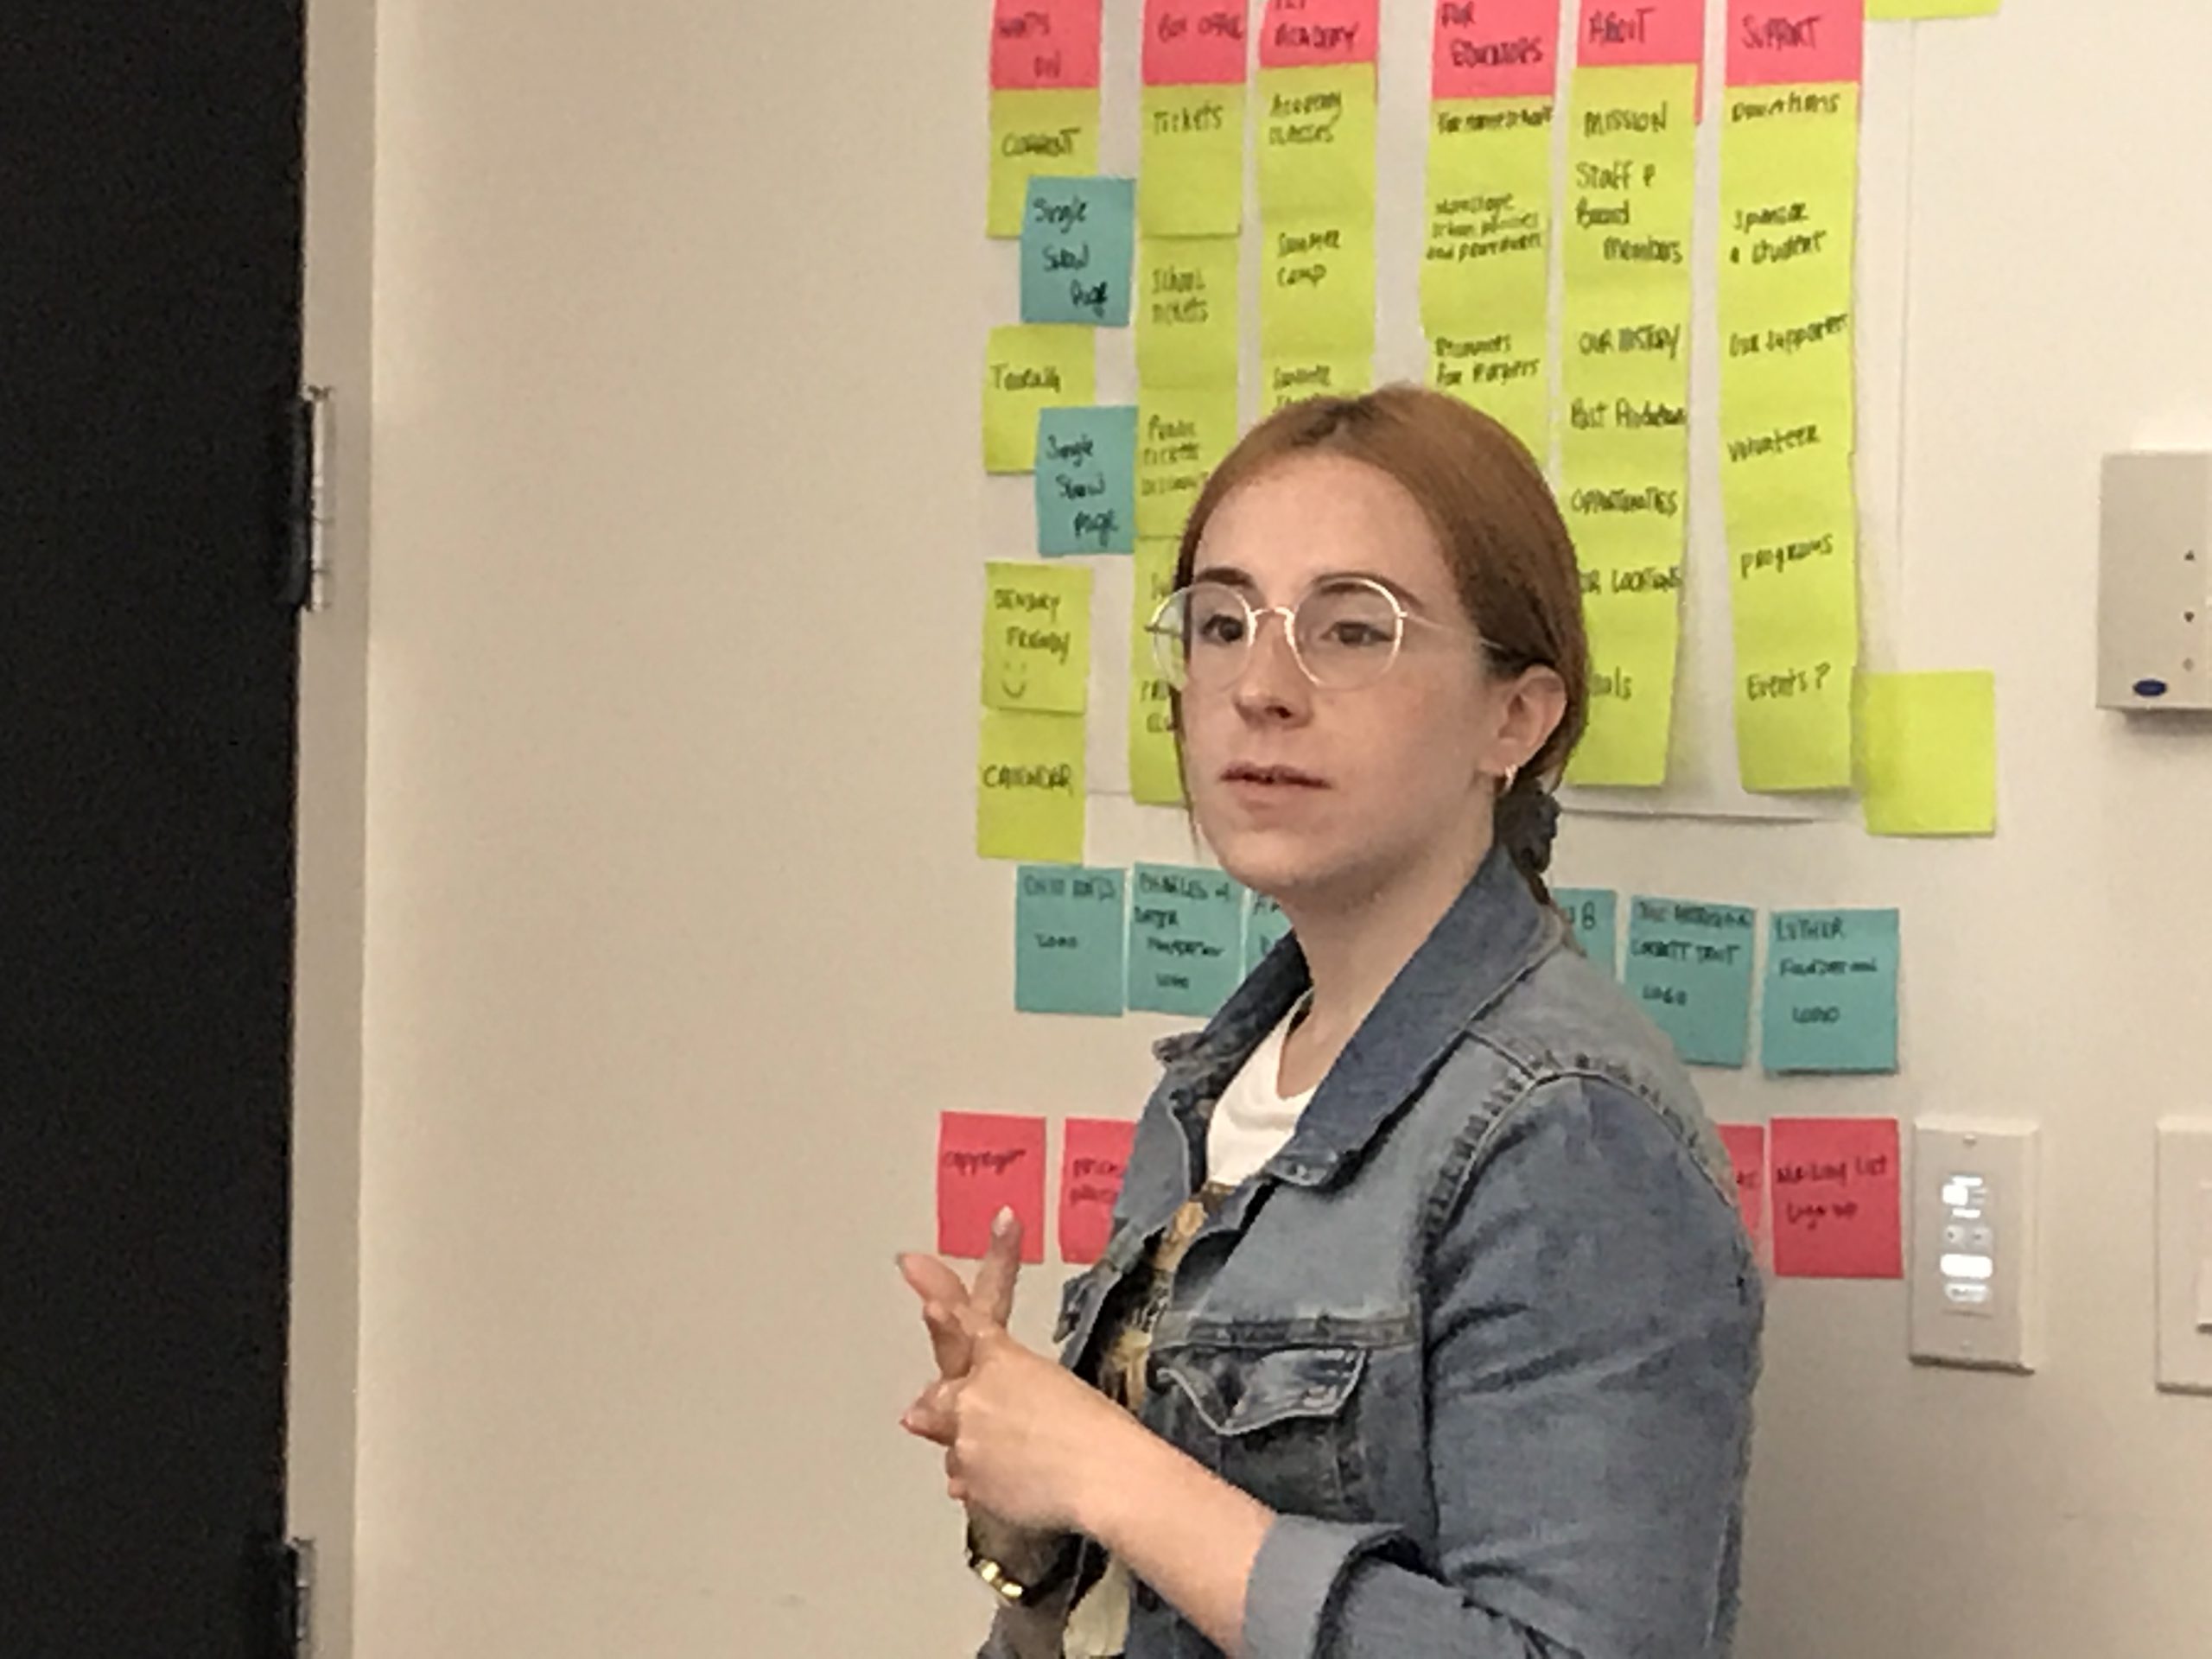 Plank's Interactive Designer, Véronique Pelletier, leading a Design Thinking activity at a Hack Day.